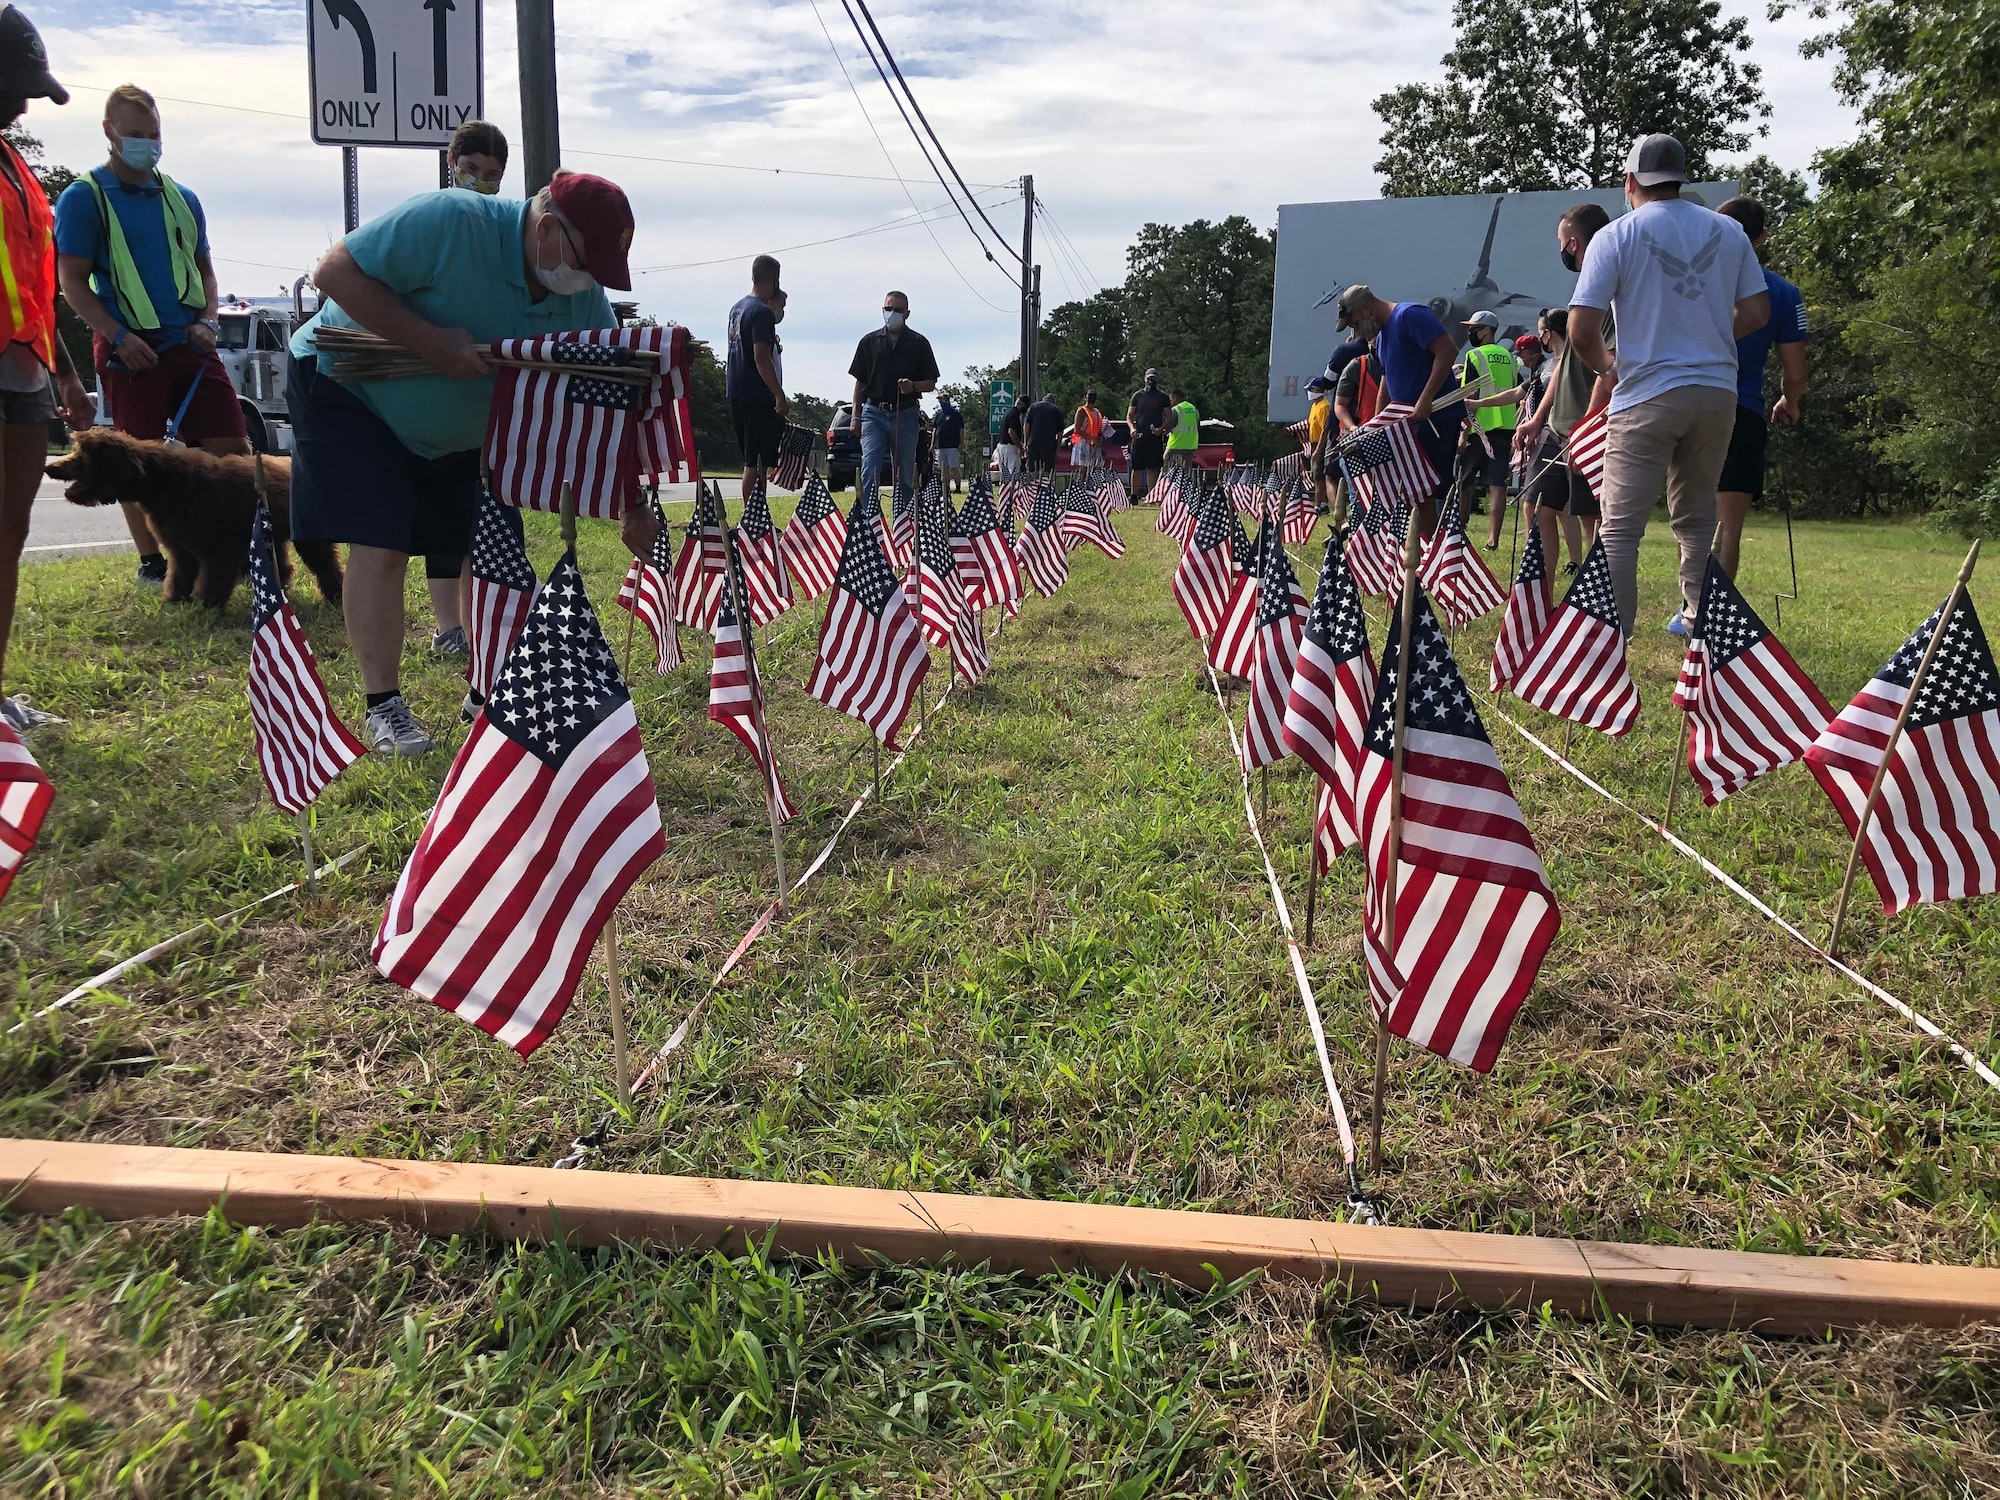 A photo of U.S. military veterans with the Flags for the Forgotten Soldiers organization, members of the Egg Harbor Township police department and members of the 177th Fighter Wing placing American flags in the ground.